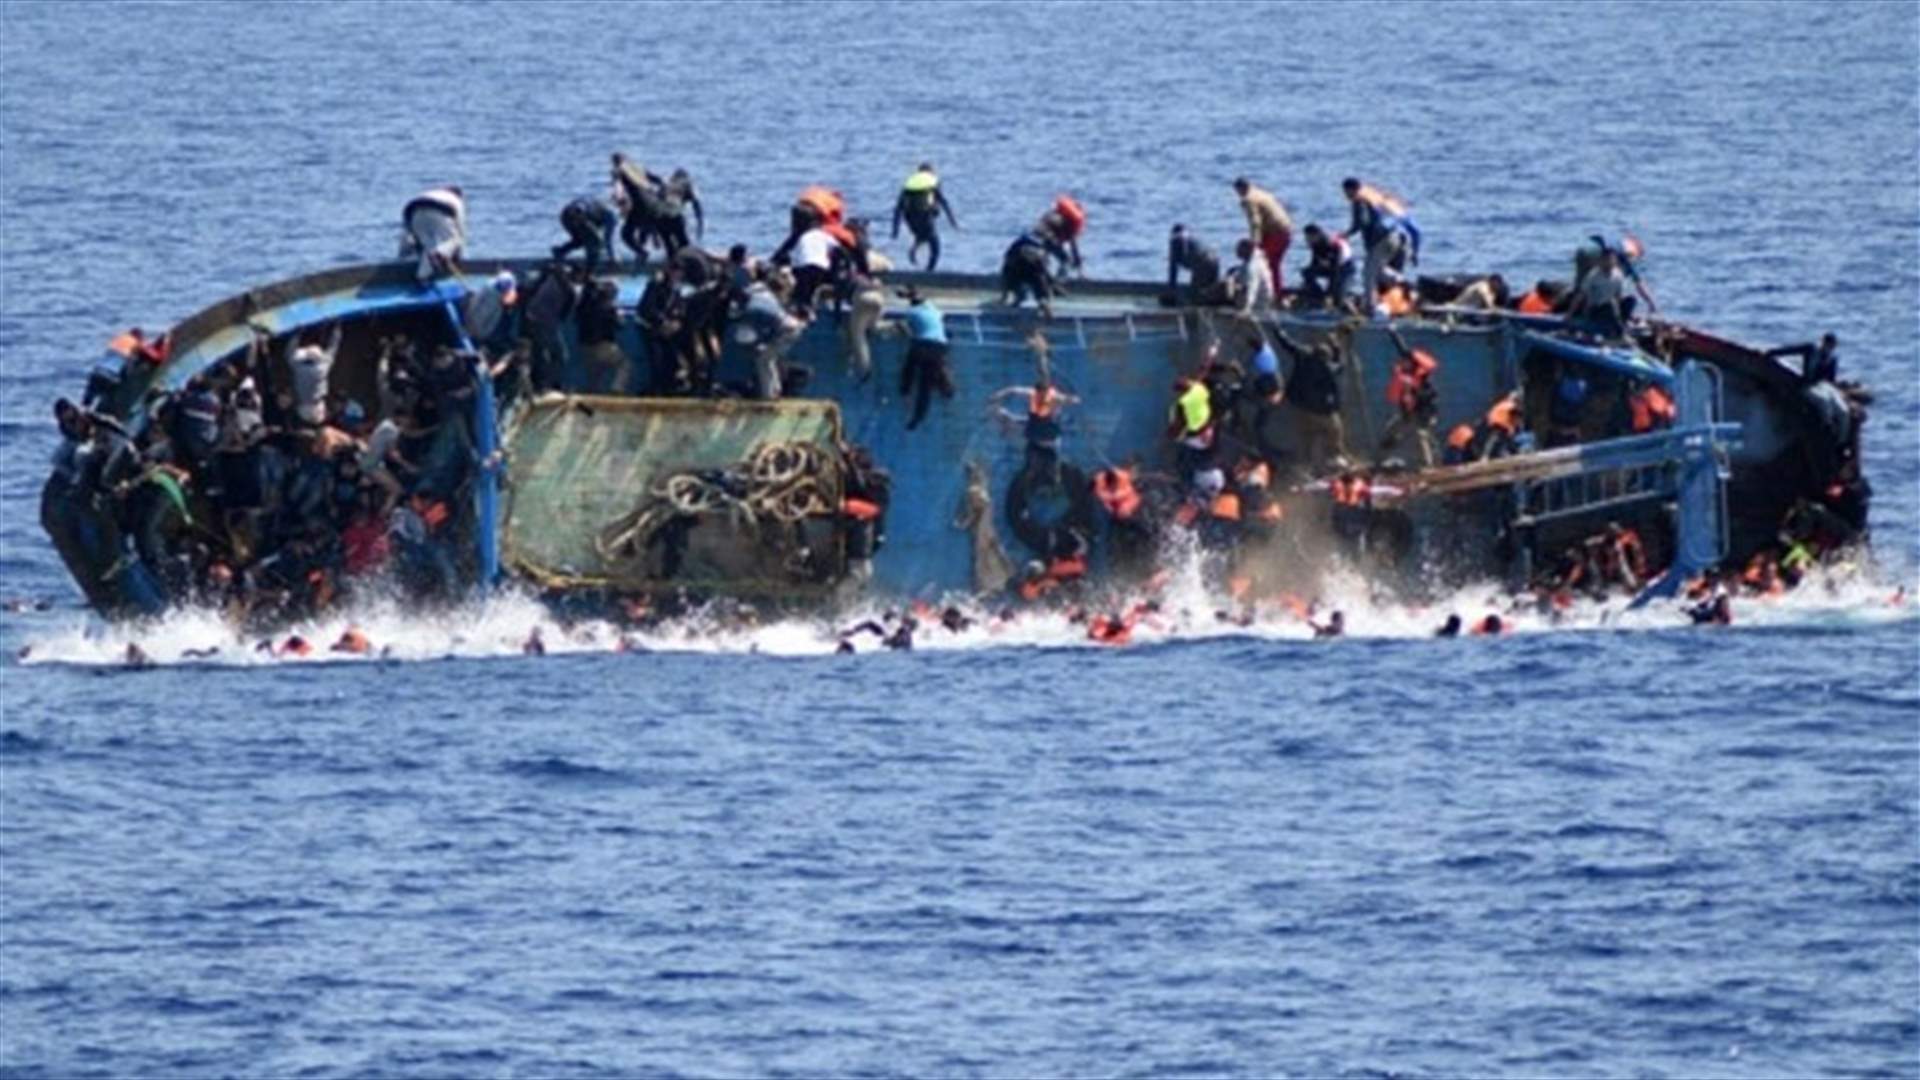 Egyptian court jails 56 over migrant boat shipwreck